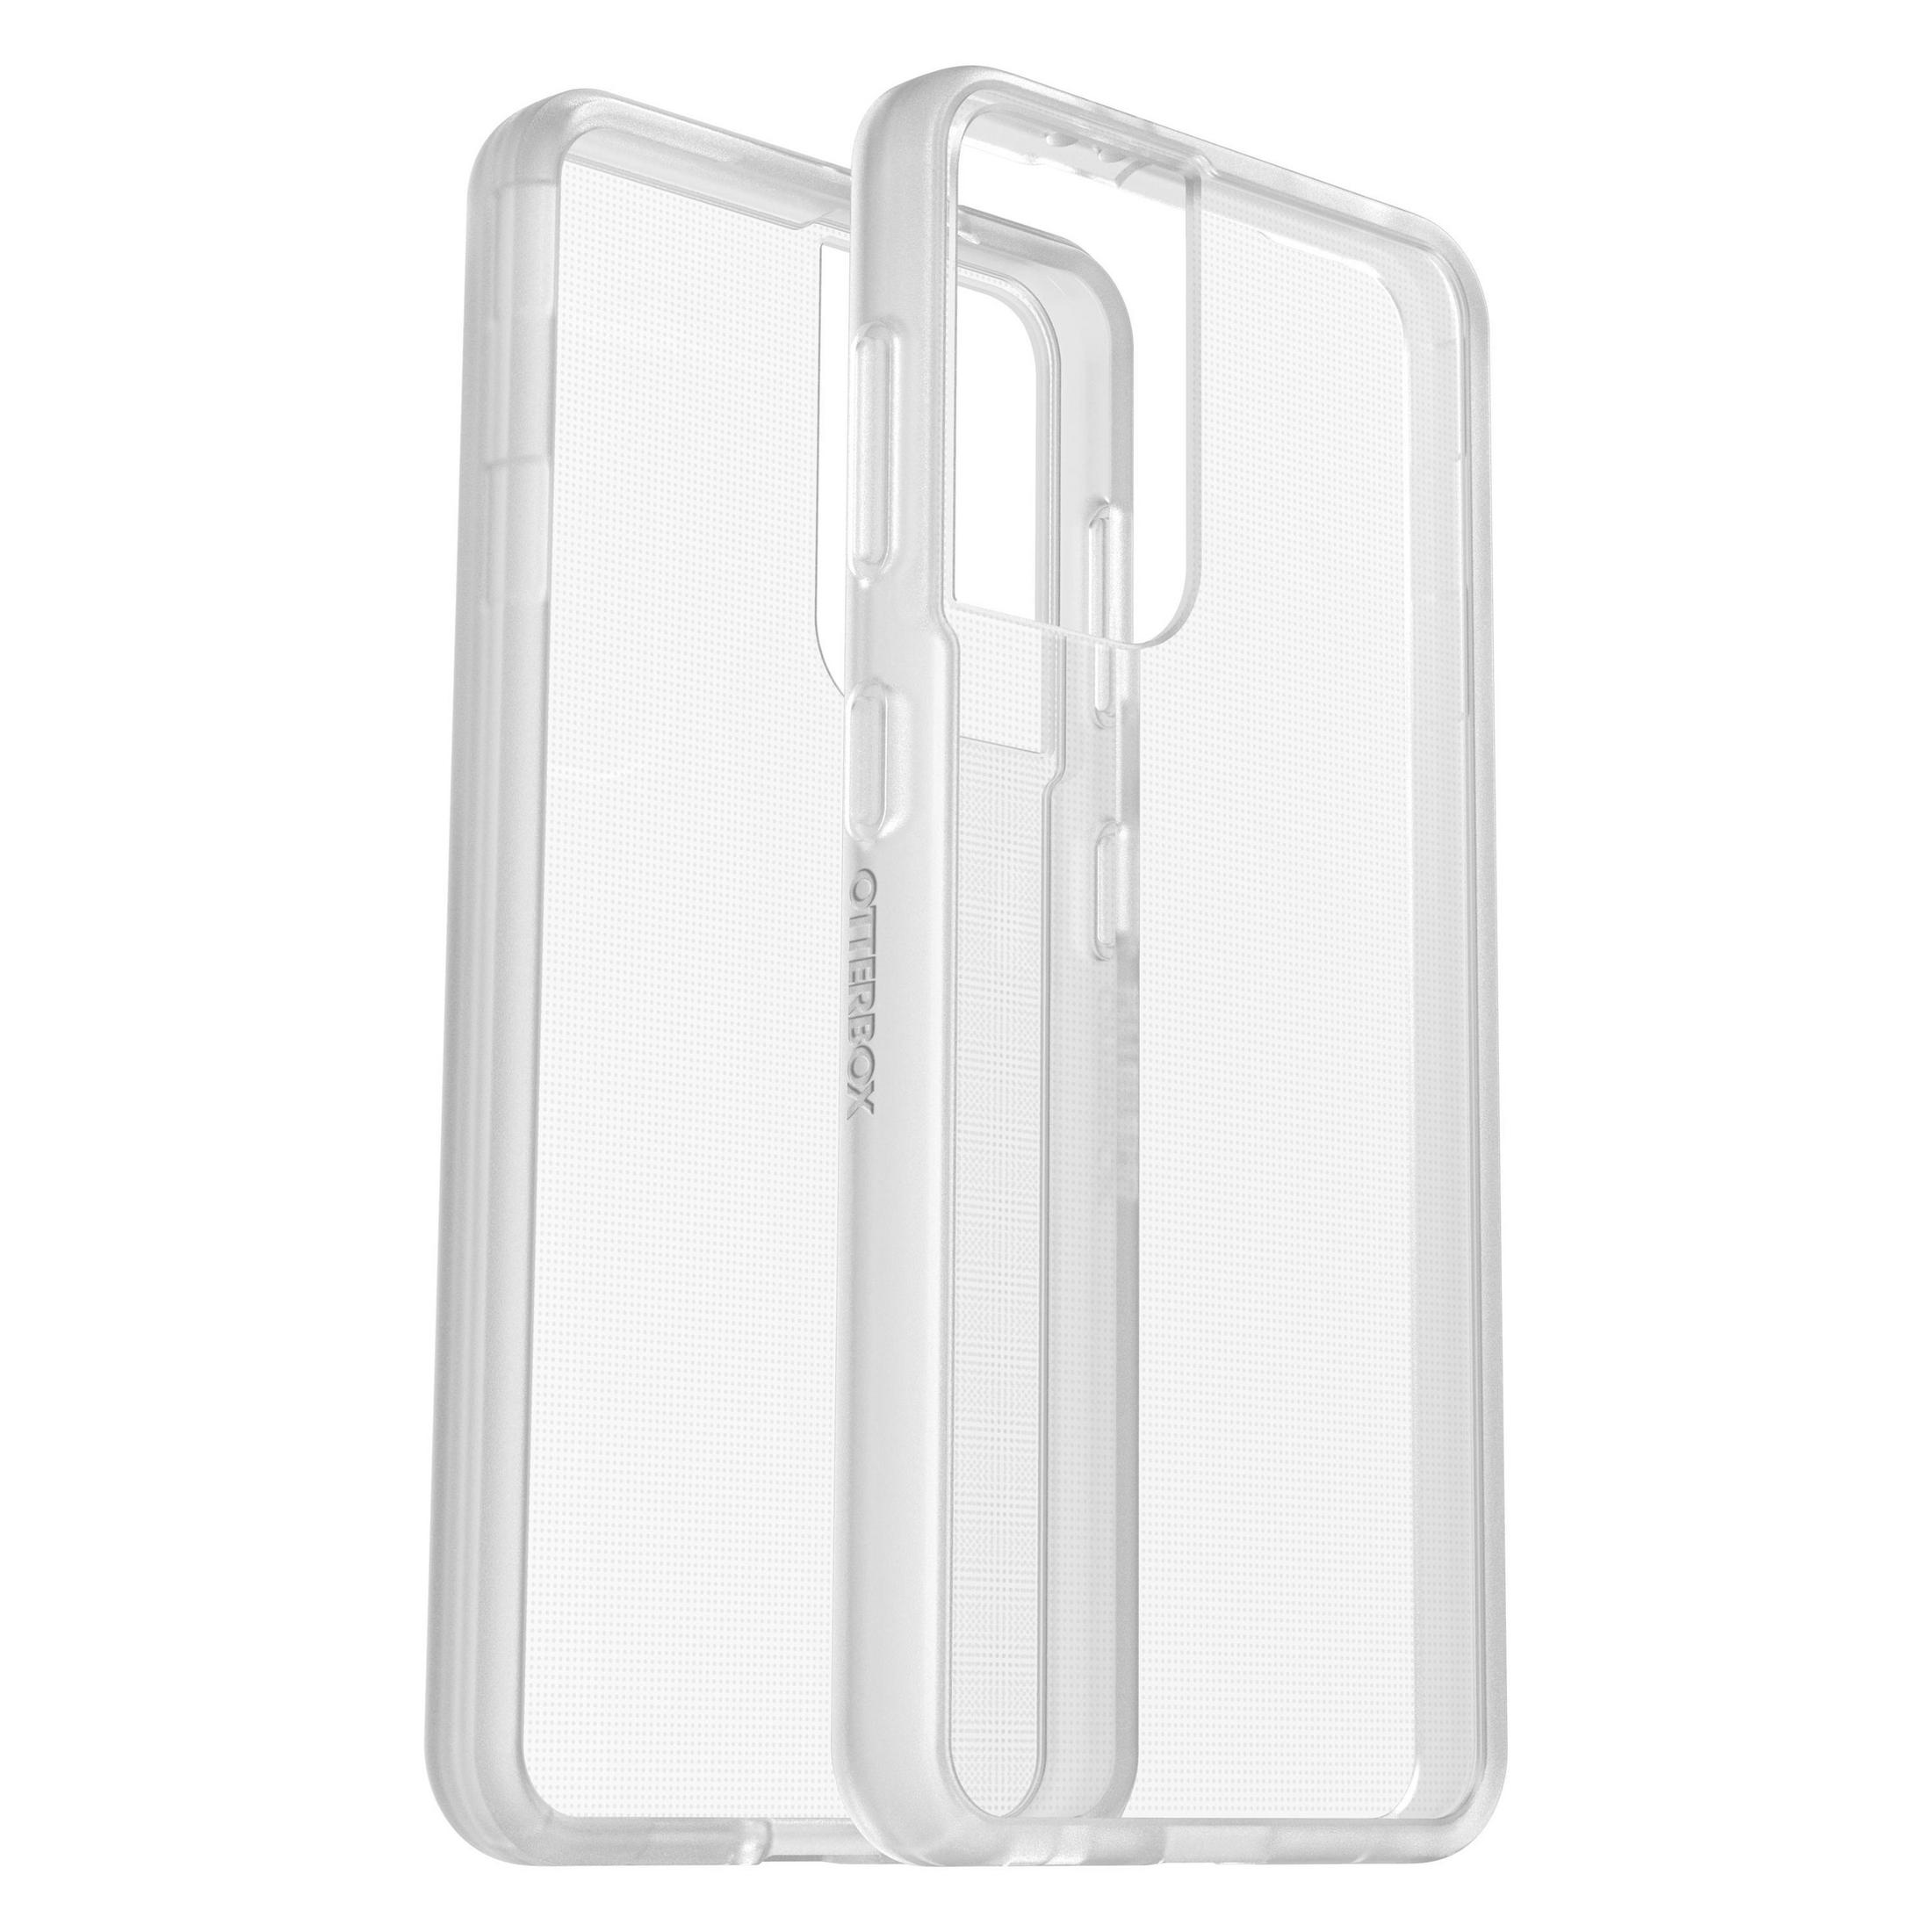 S21 REACT + Samsung, CP 78-80332 CLEAR, OTTERBOX FILM Galaxy Backcover, Transparent S21,